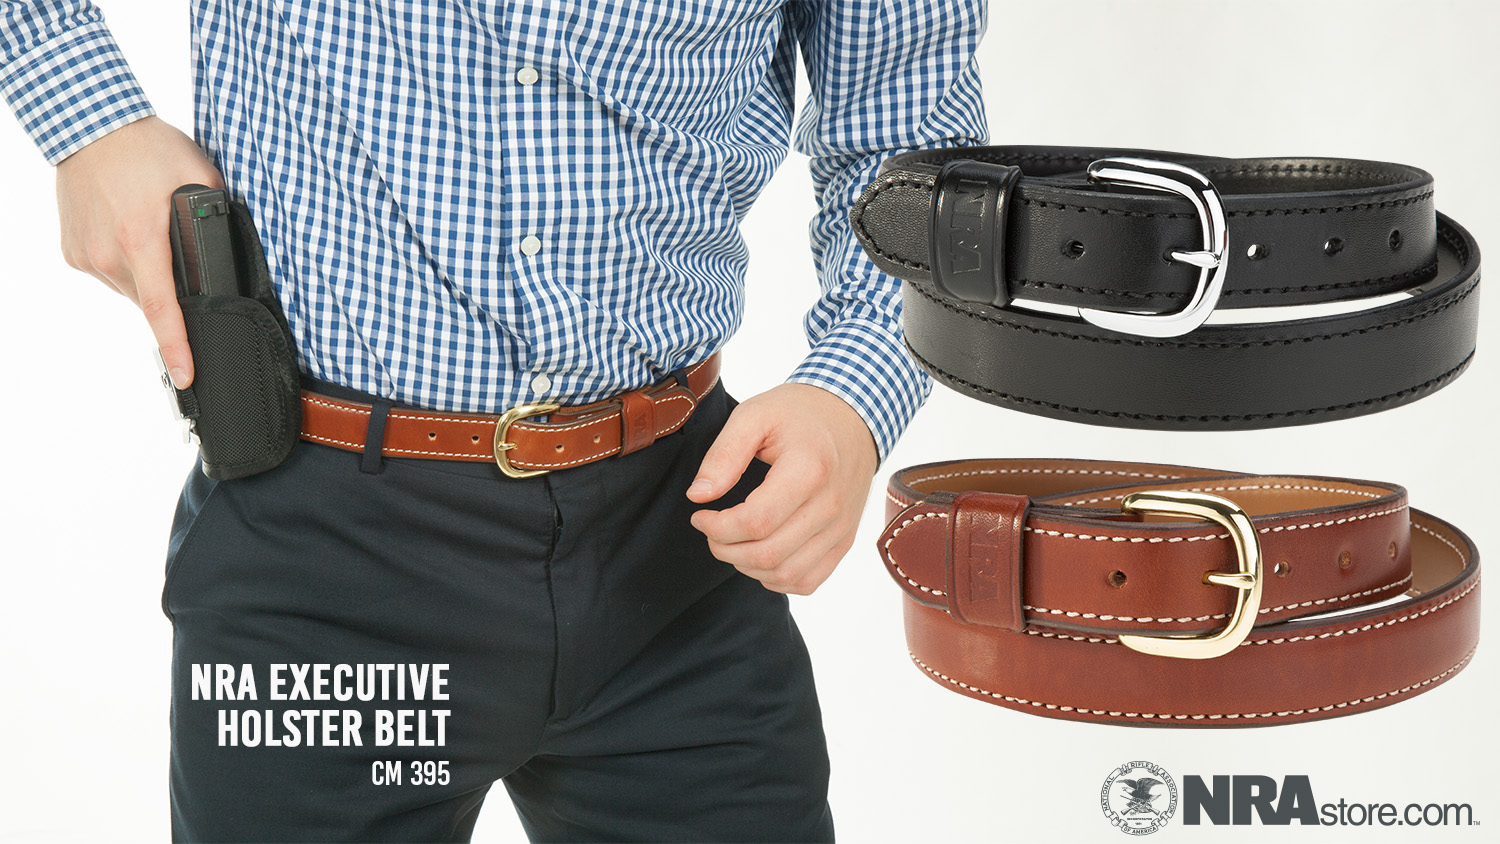 Balance Personal Safety and Formal Attire With the NRA Executive Holster Belt